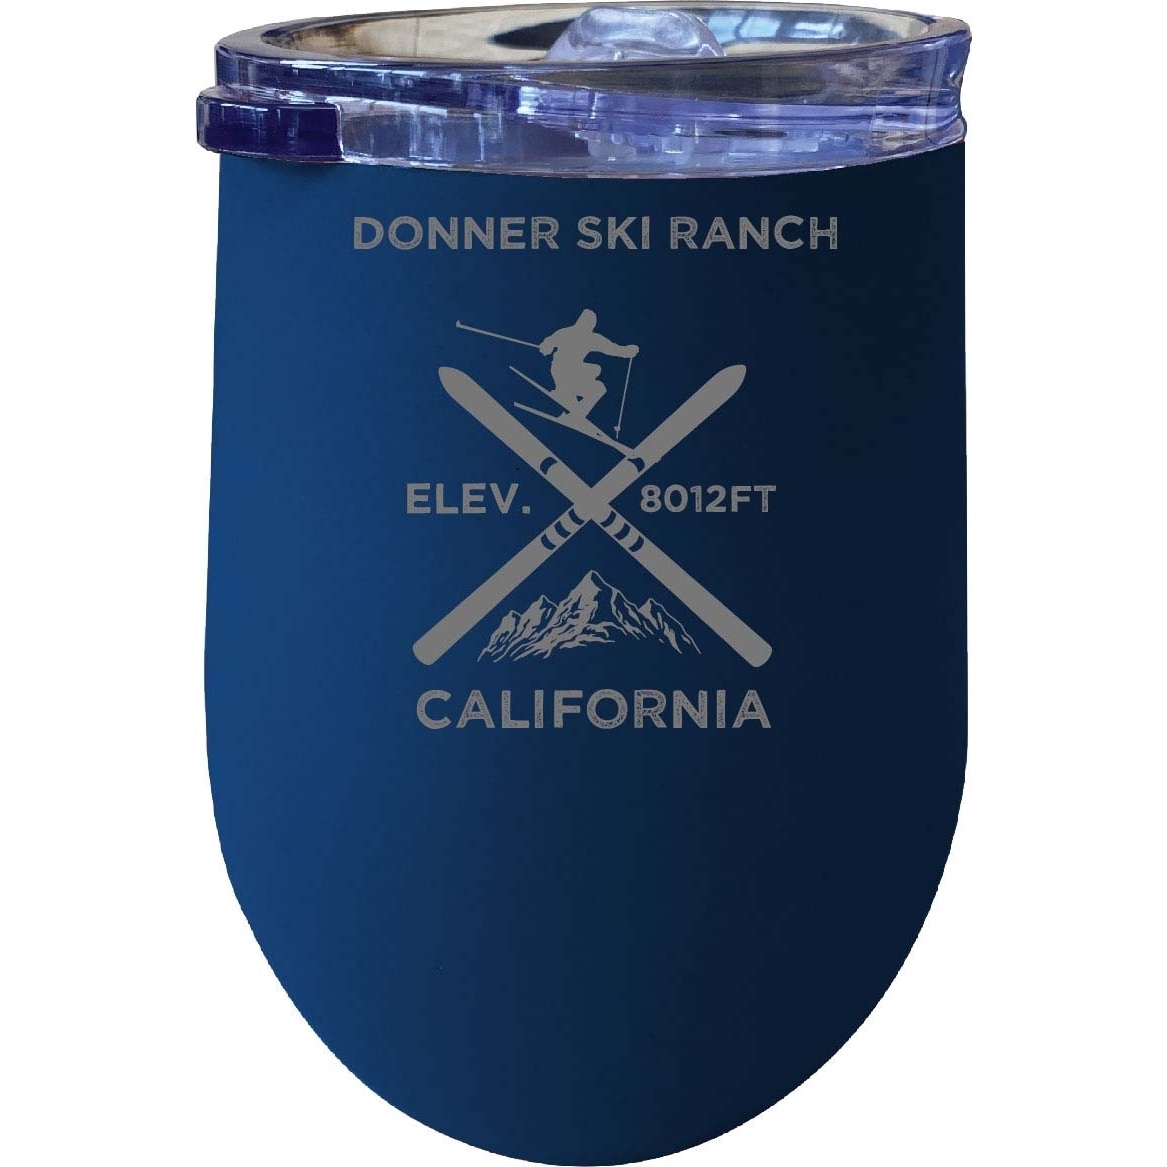 Donner Ski Ranch California Ski Souvenir 12 Oz Laser Etched Insulated Wine Stainless Steel Tumbler - White